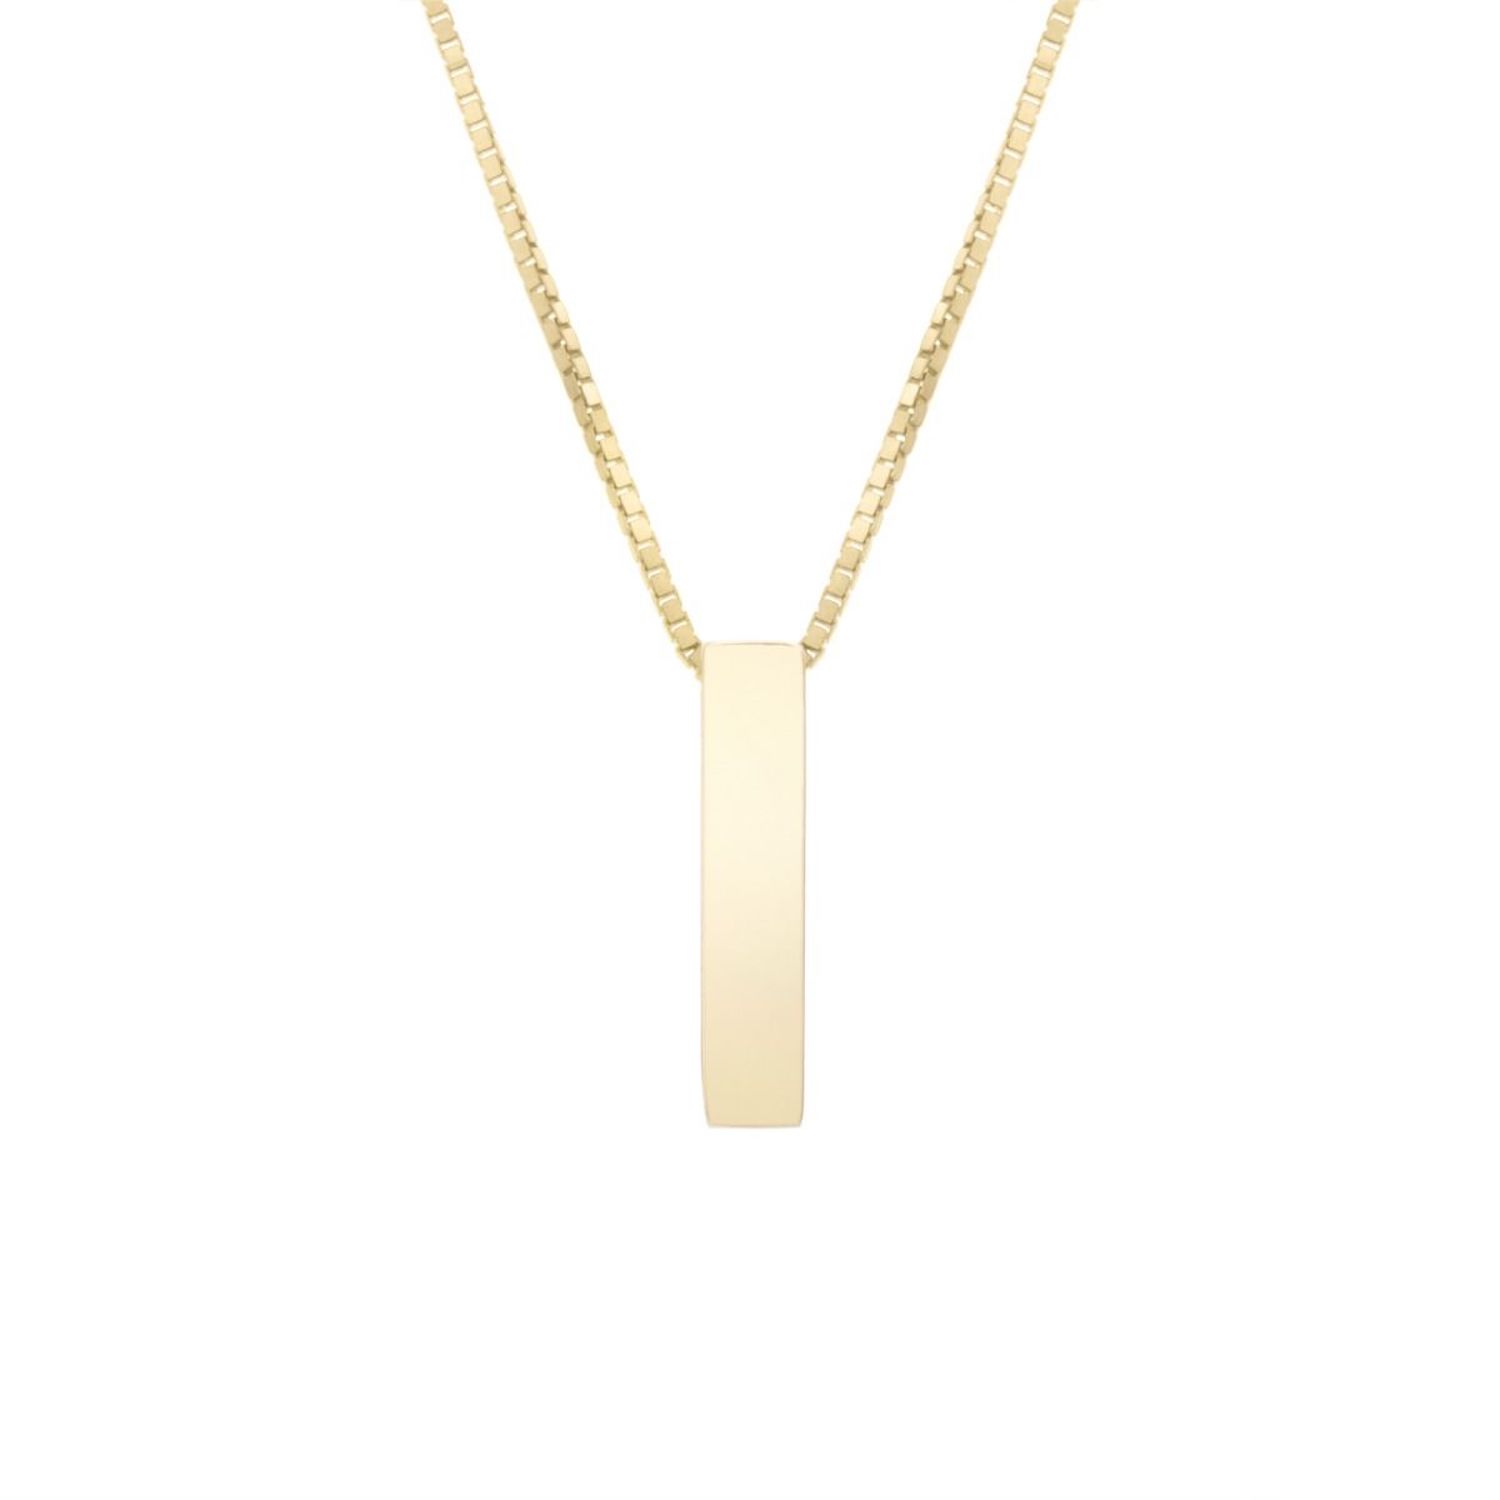 14K Yellow Gold Block Letter Initial Pendant Box Chain Necklace 16"-18" - I